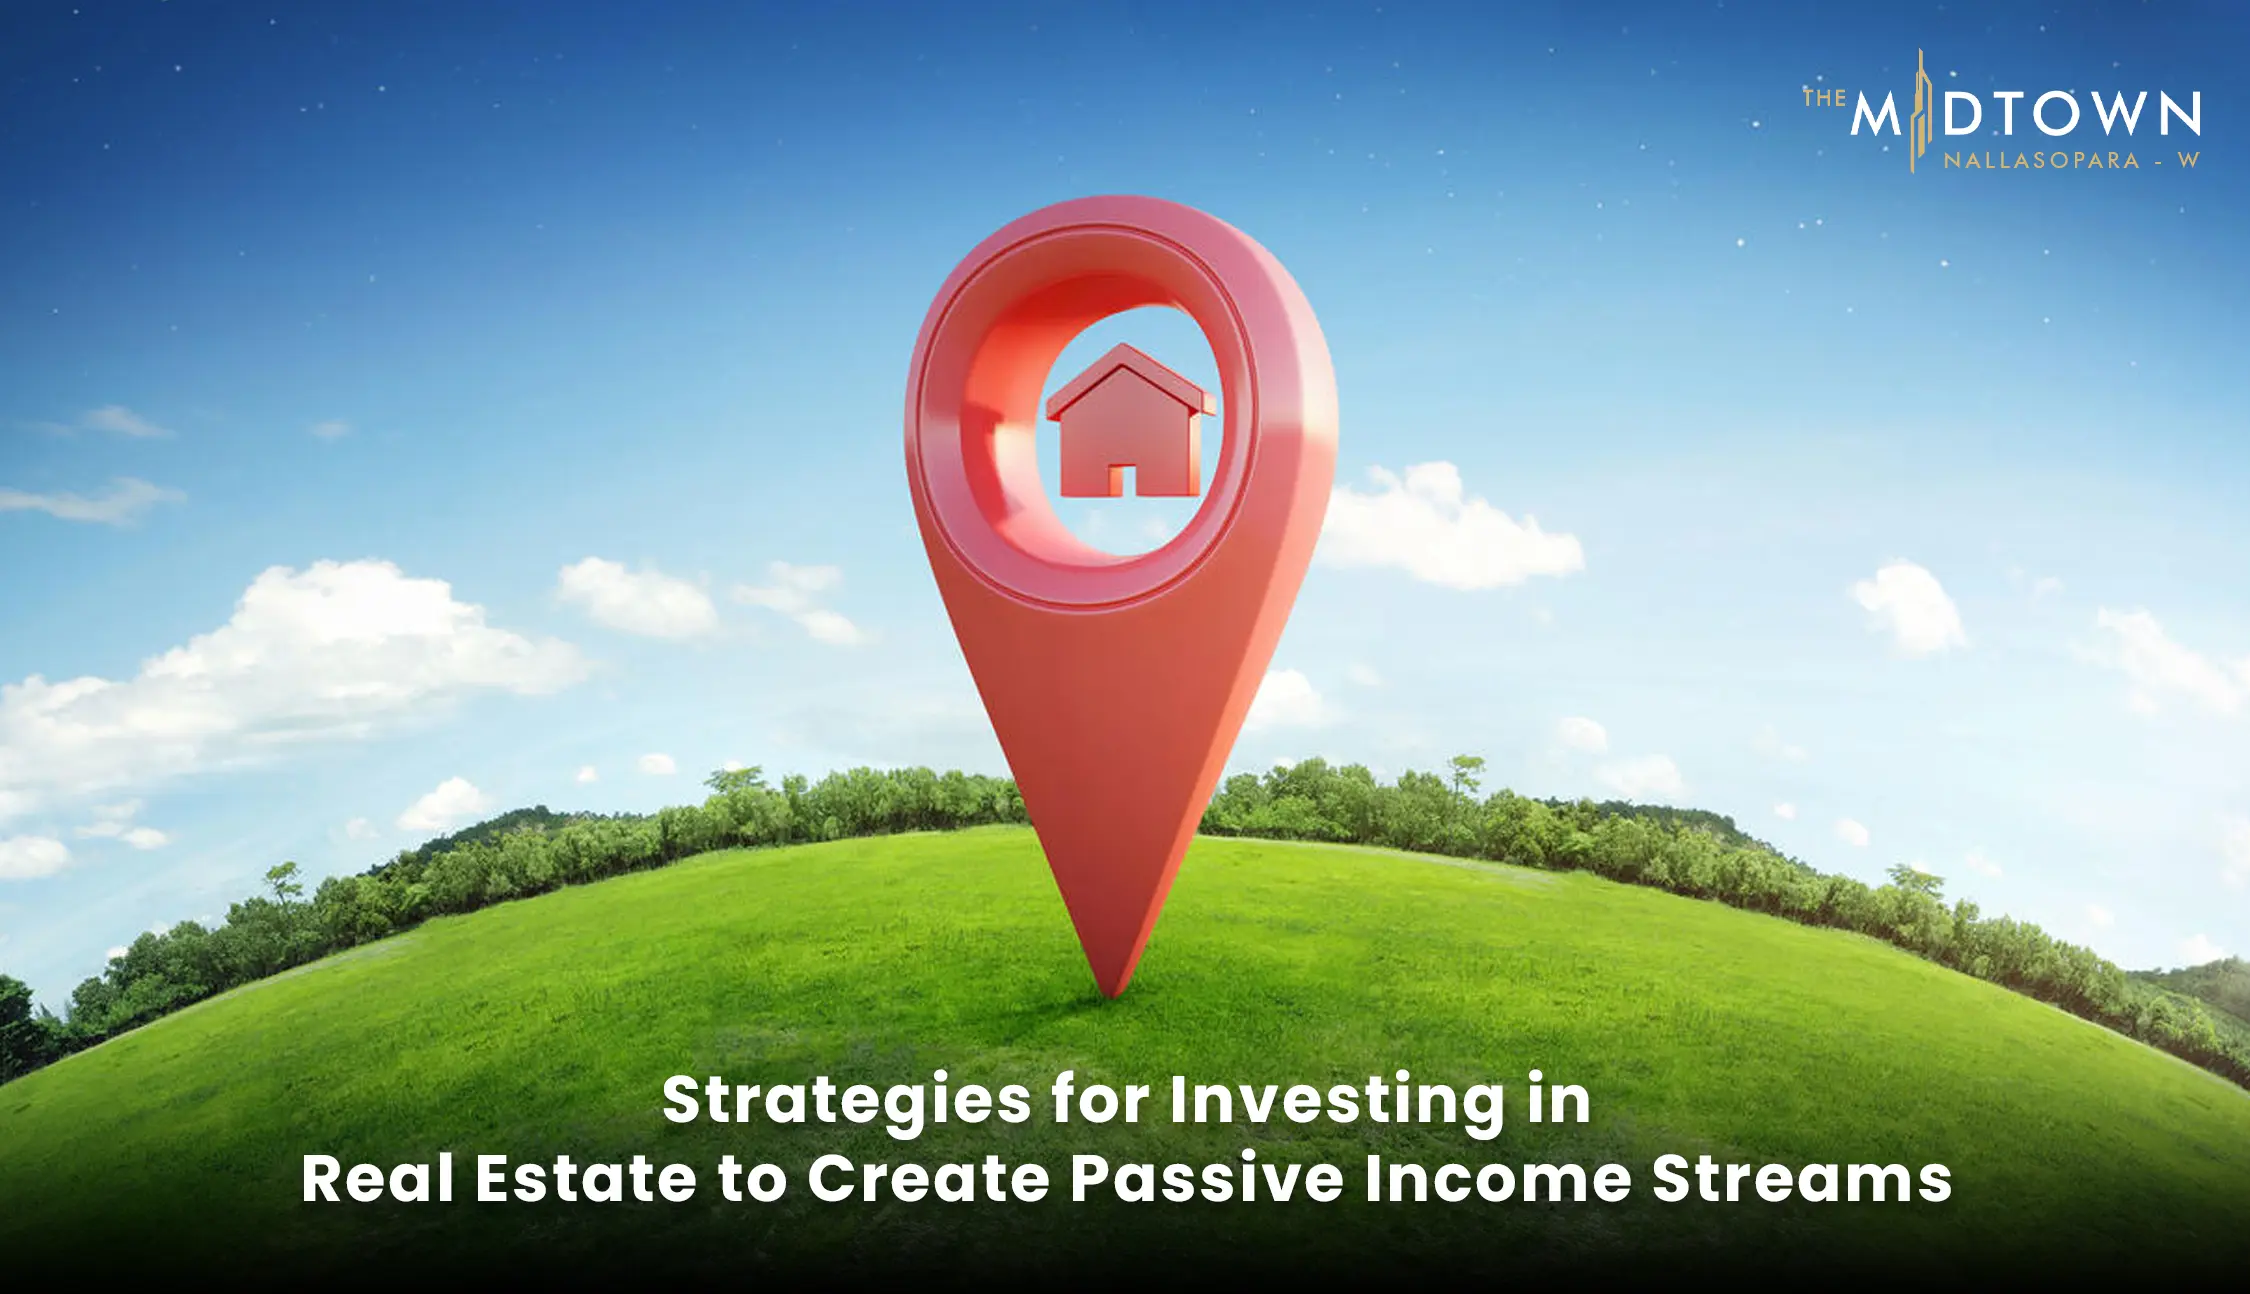 Strategies for Investing in Real Estate to Create Passive Income Streams